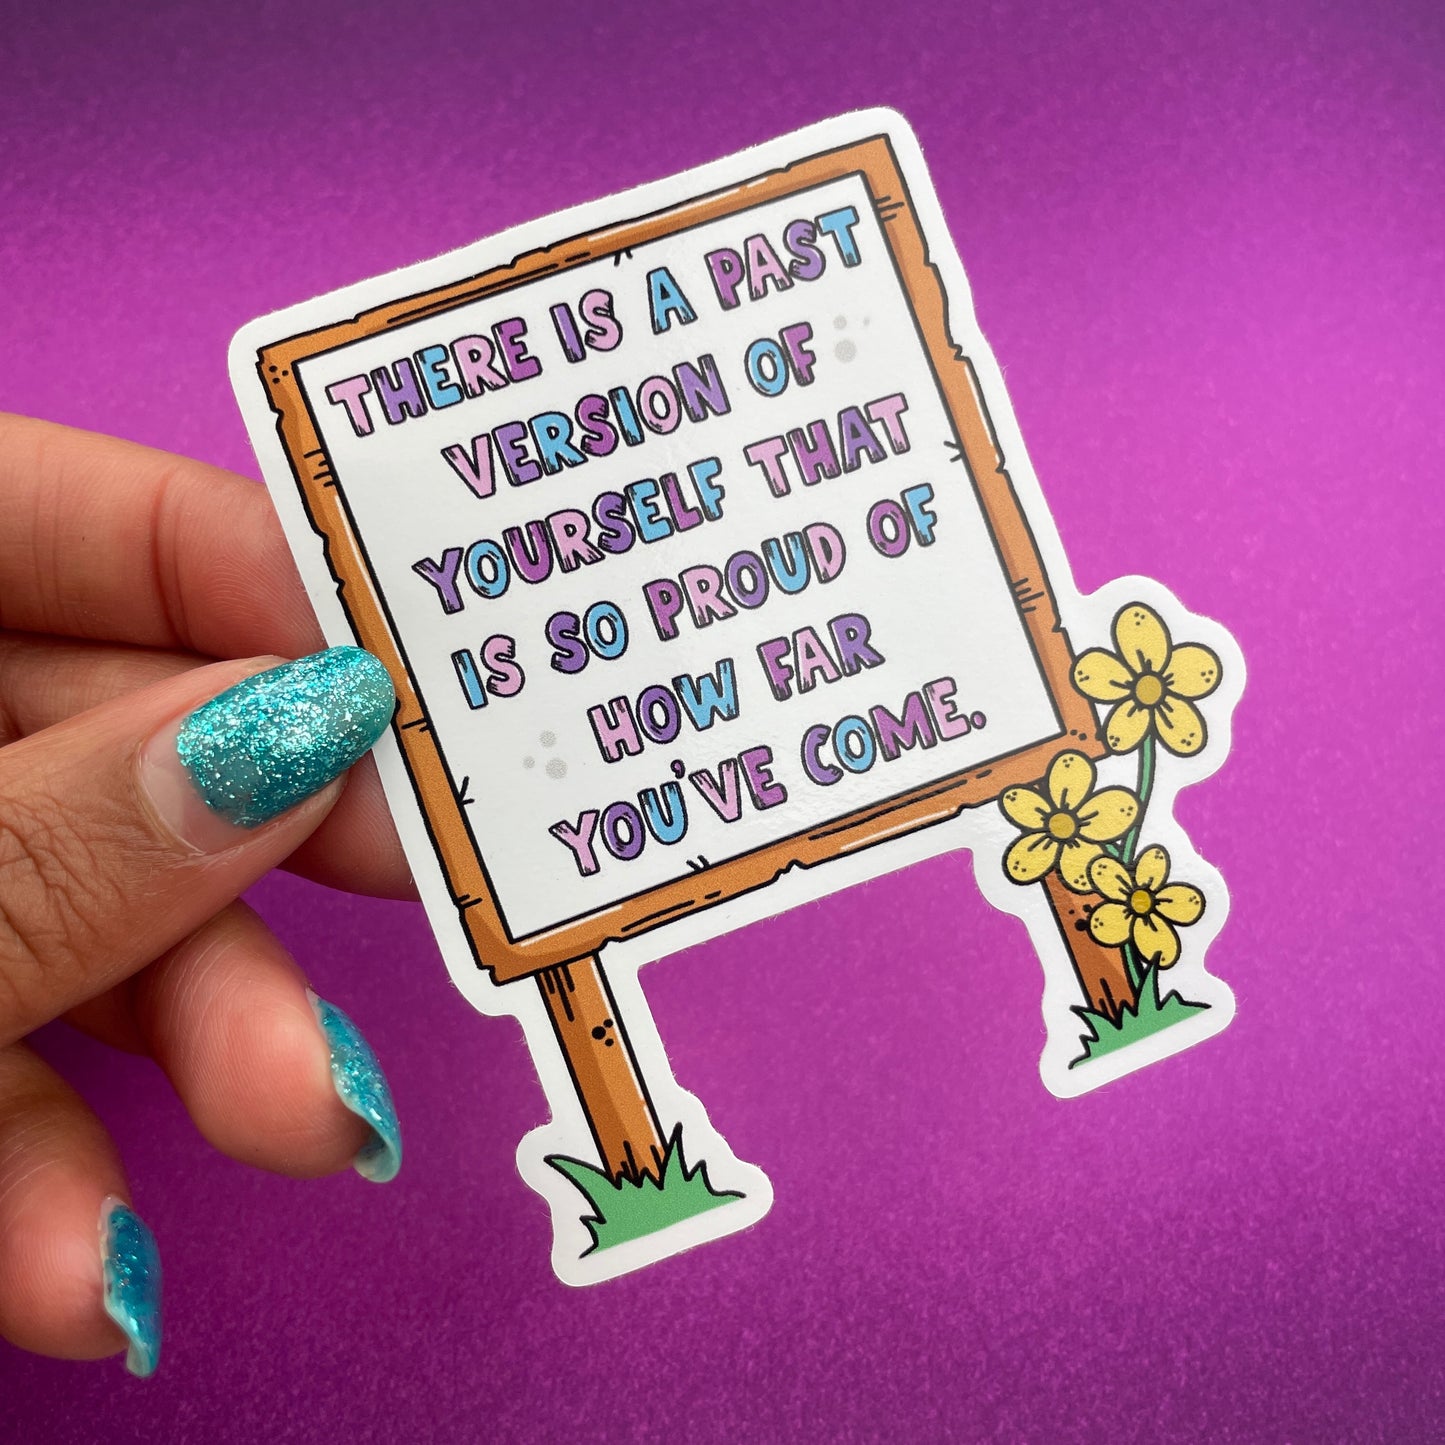 Be proud of how far you’ve come   - motivational  quote - mental health - vinyl sticker